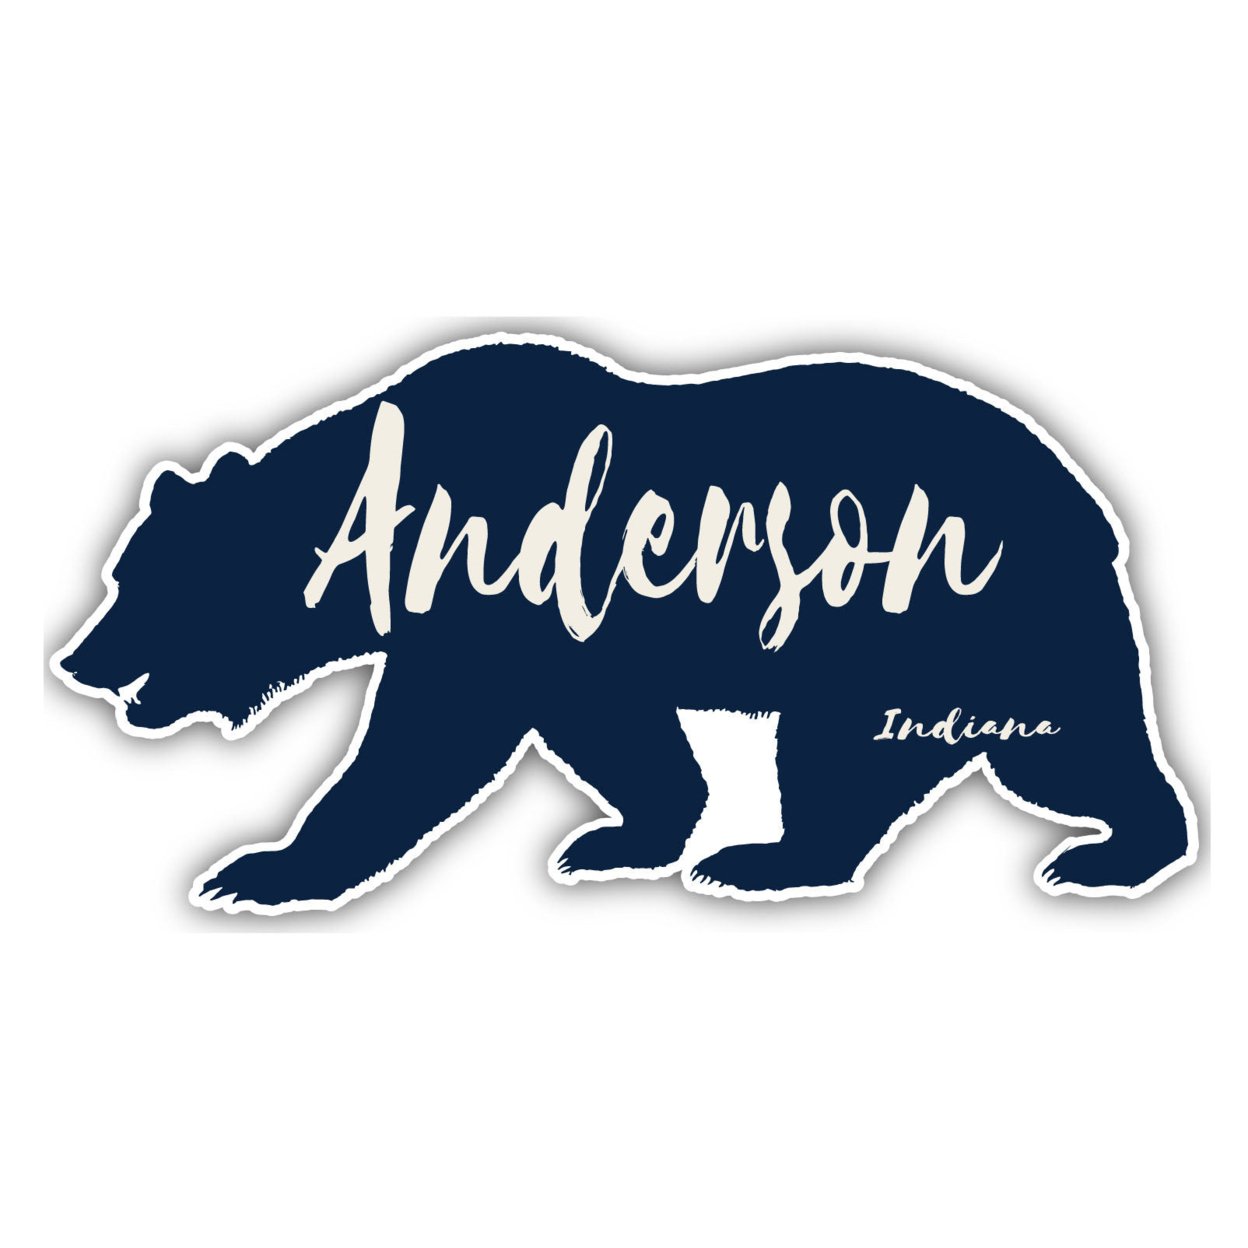 Anderson Indiana Souvenir Decorative Stickers (Choose Theme And Size) - 4-Pack, 10-Inch, Bear